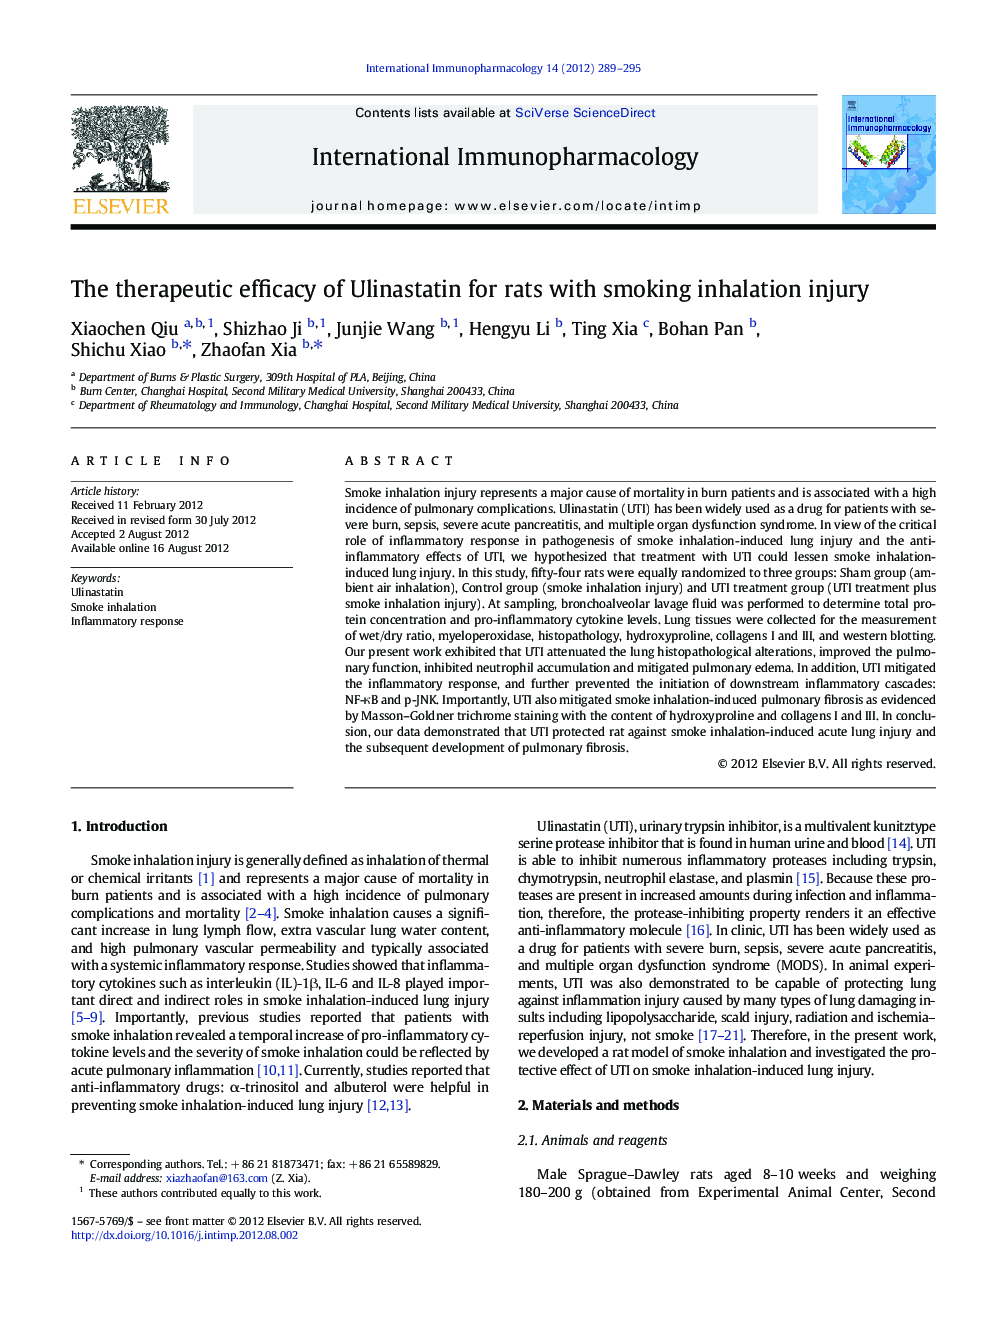 The therapeutic efficacy of Ulinastatin for rats with smoking inhalation injury